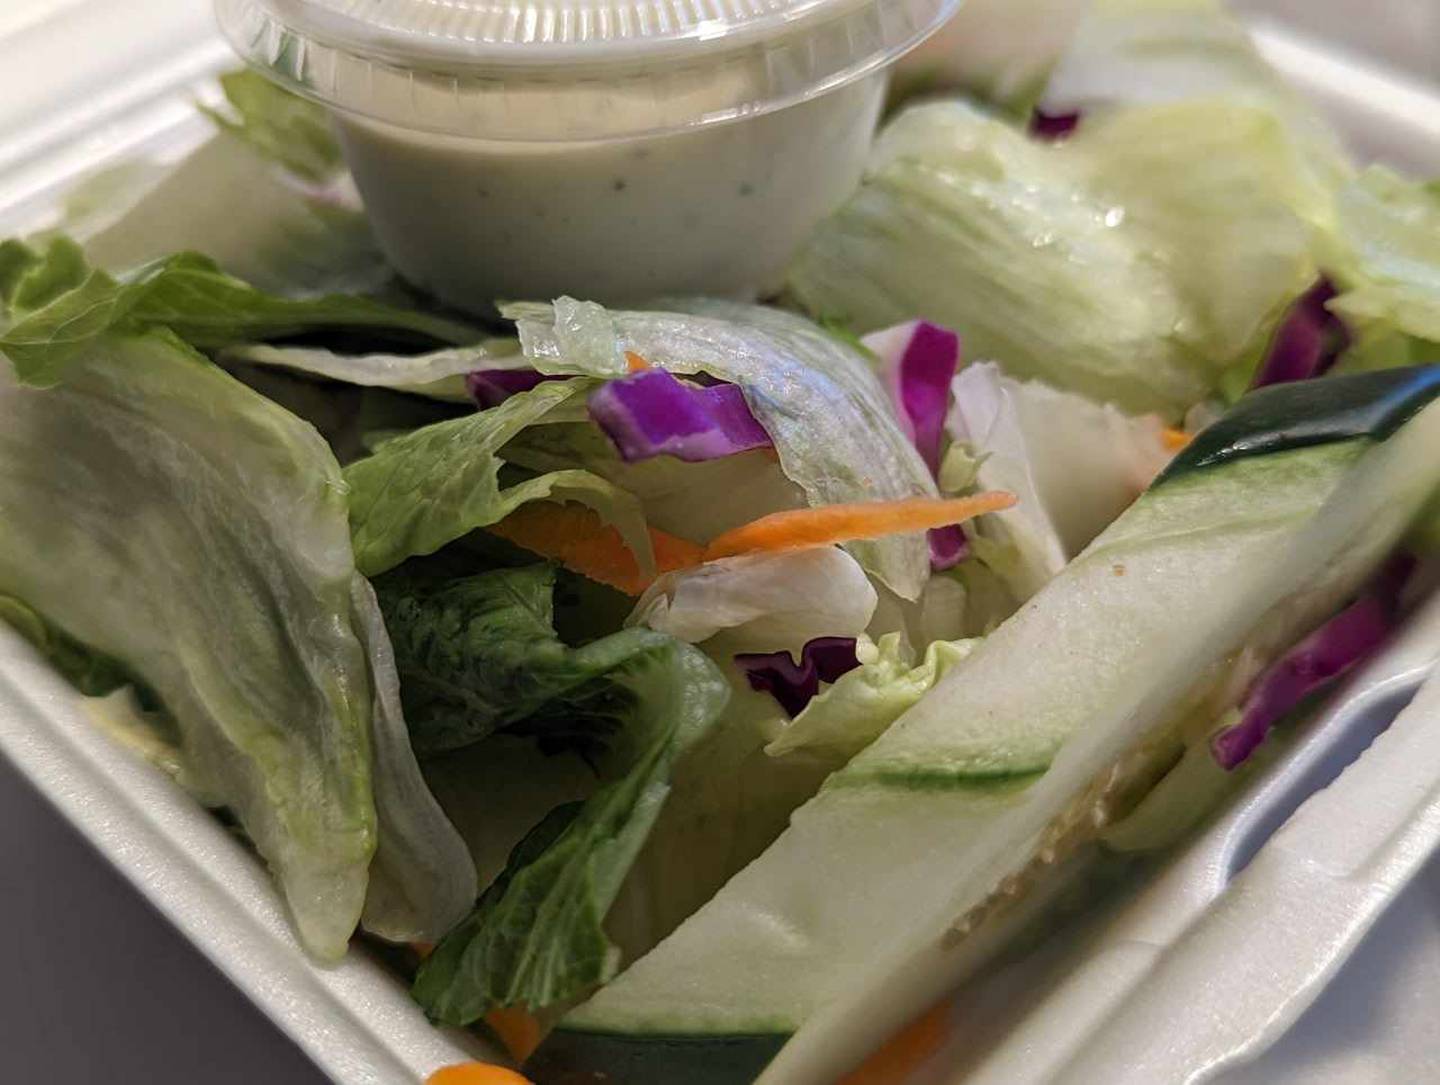 The side salad at Southern Cafe in Crest Hill had the right balance of crisp green lettuce and fresh vegetables.